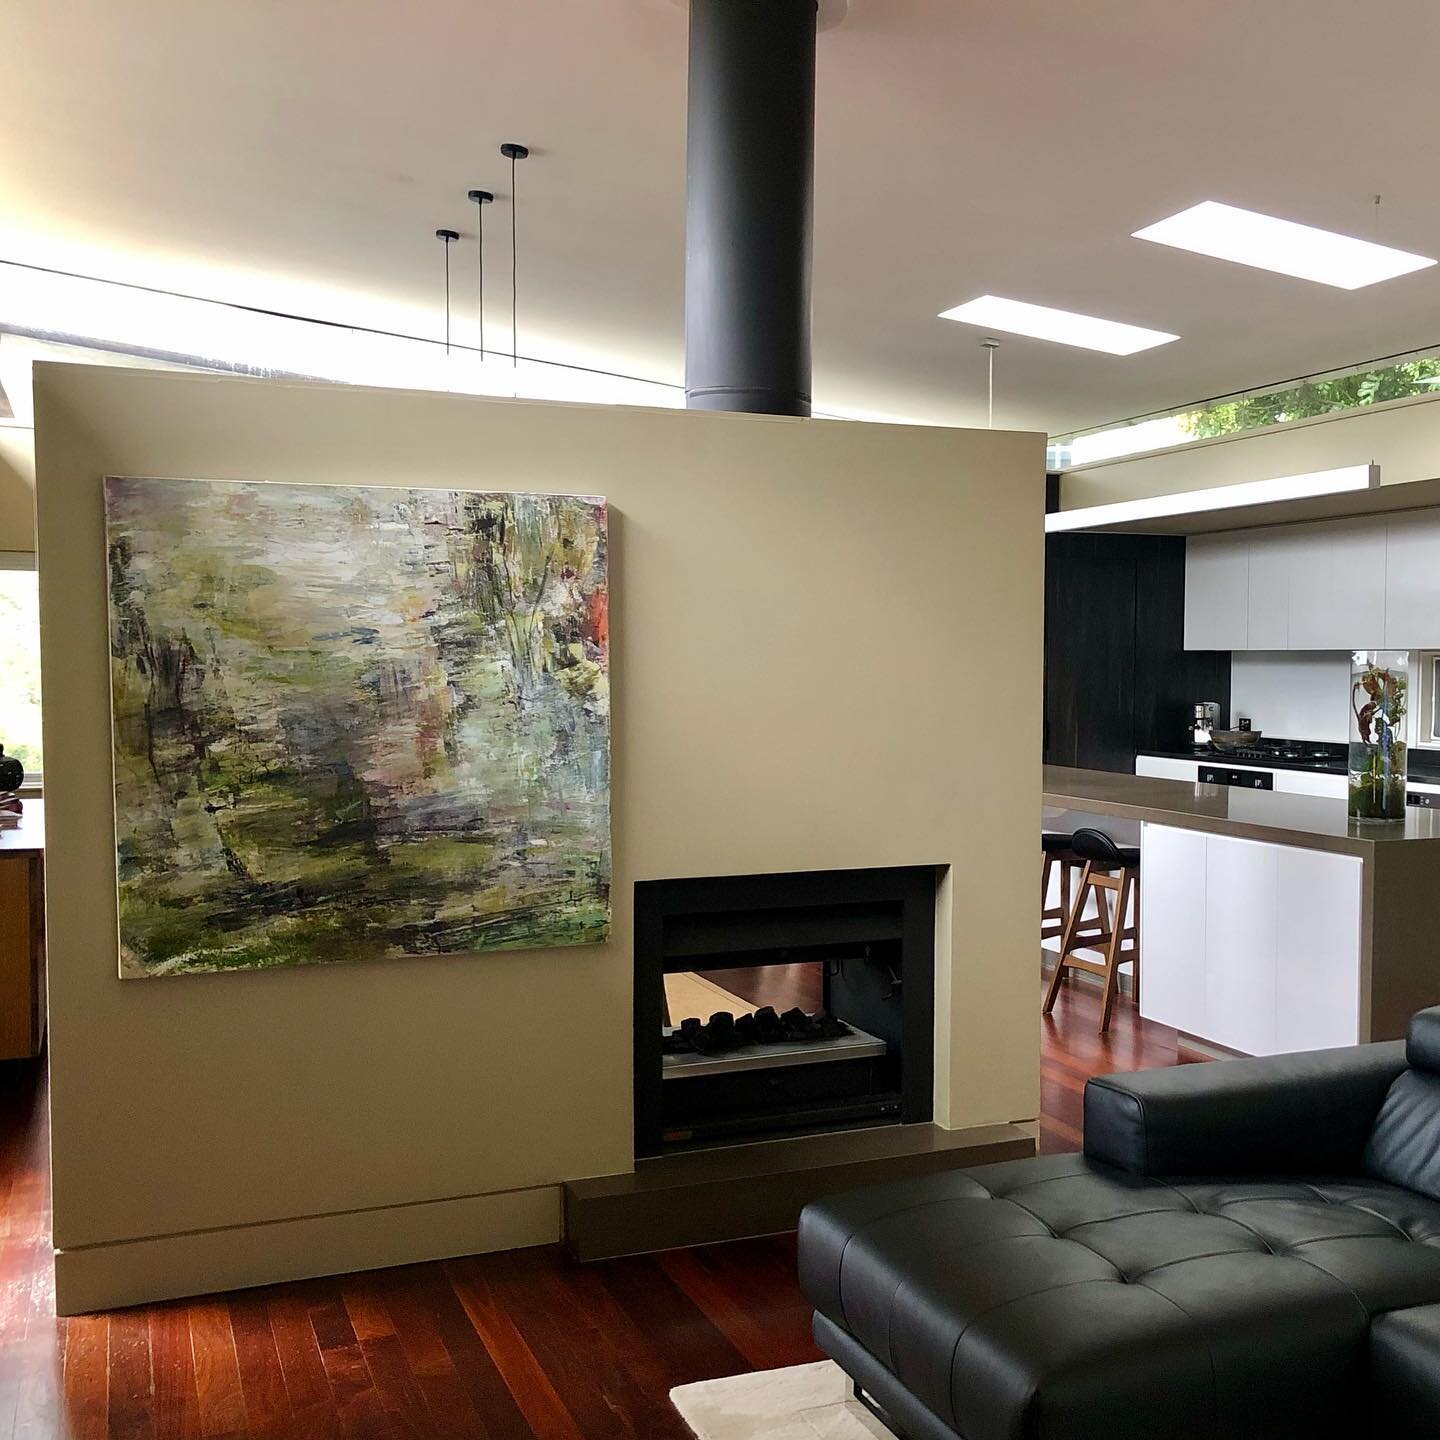 It&rsquo;s wonderful when someone reminds you that your artwork still speaks to them and sends you a pic! &hellip;a joy for both collector and artist and brings more meaning into the process.  #paintinginsitu #artcollectors #visuallanguage #expressio